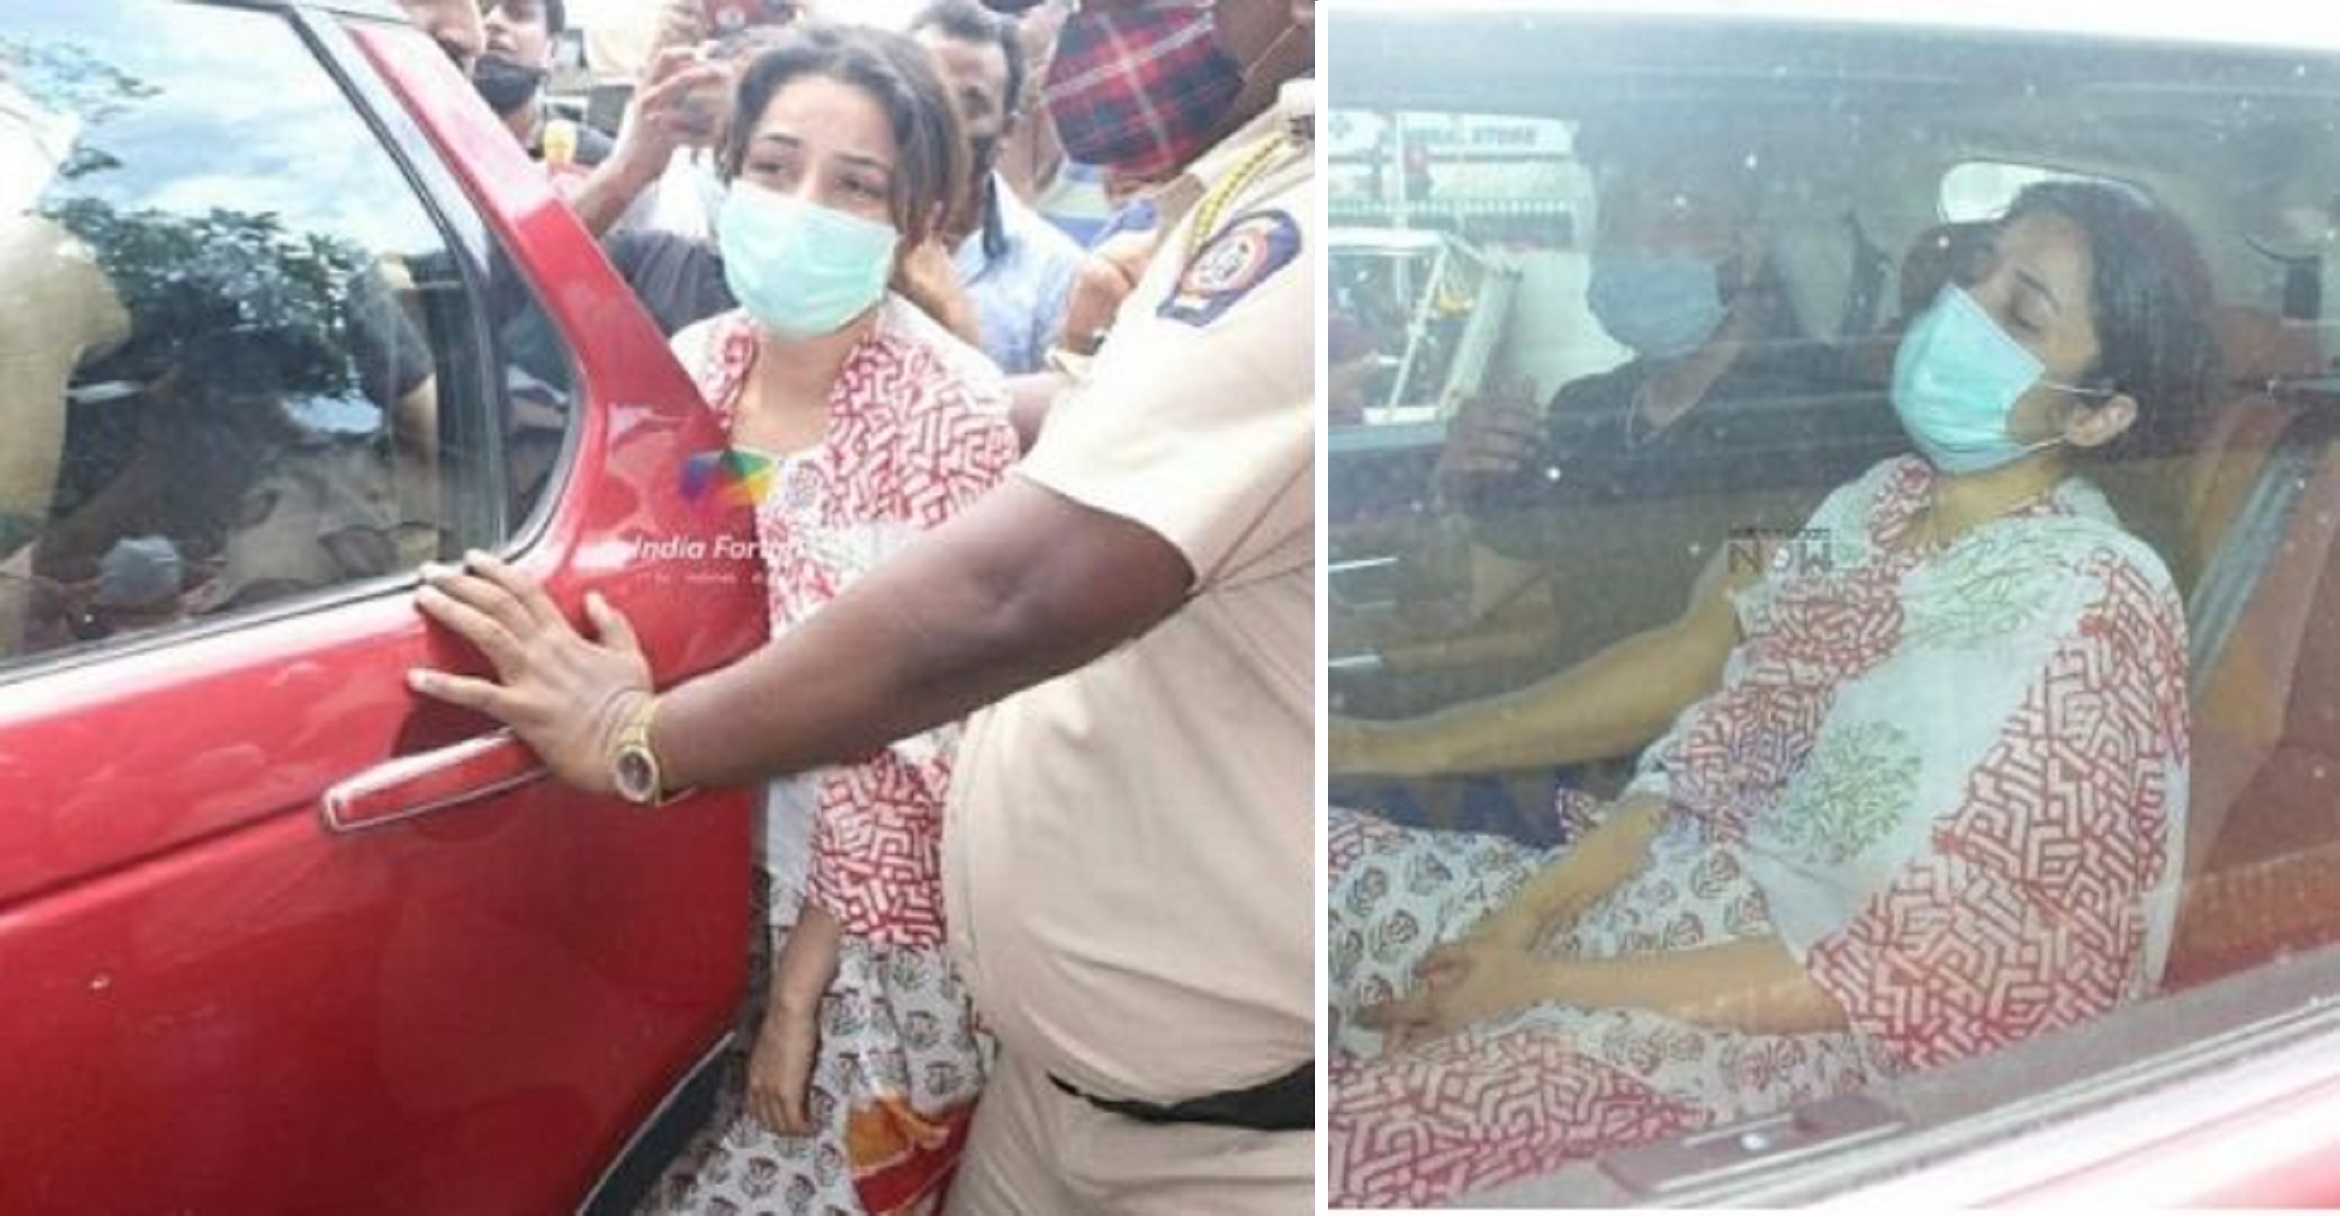 Shehnaaz Gill Inconsolable At Sidharth Shukla Funeral, Joins Family To Perform Last Rites